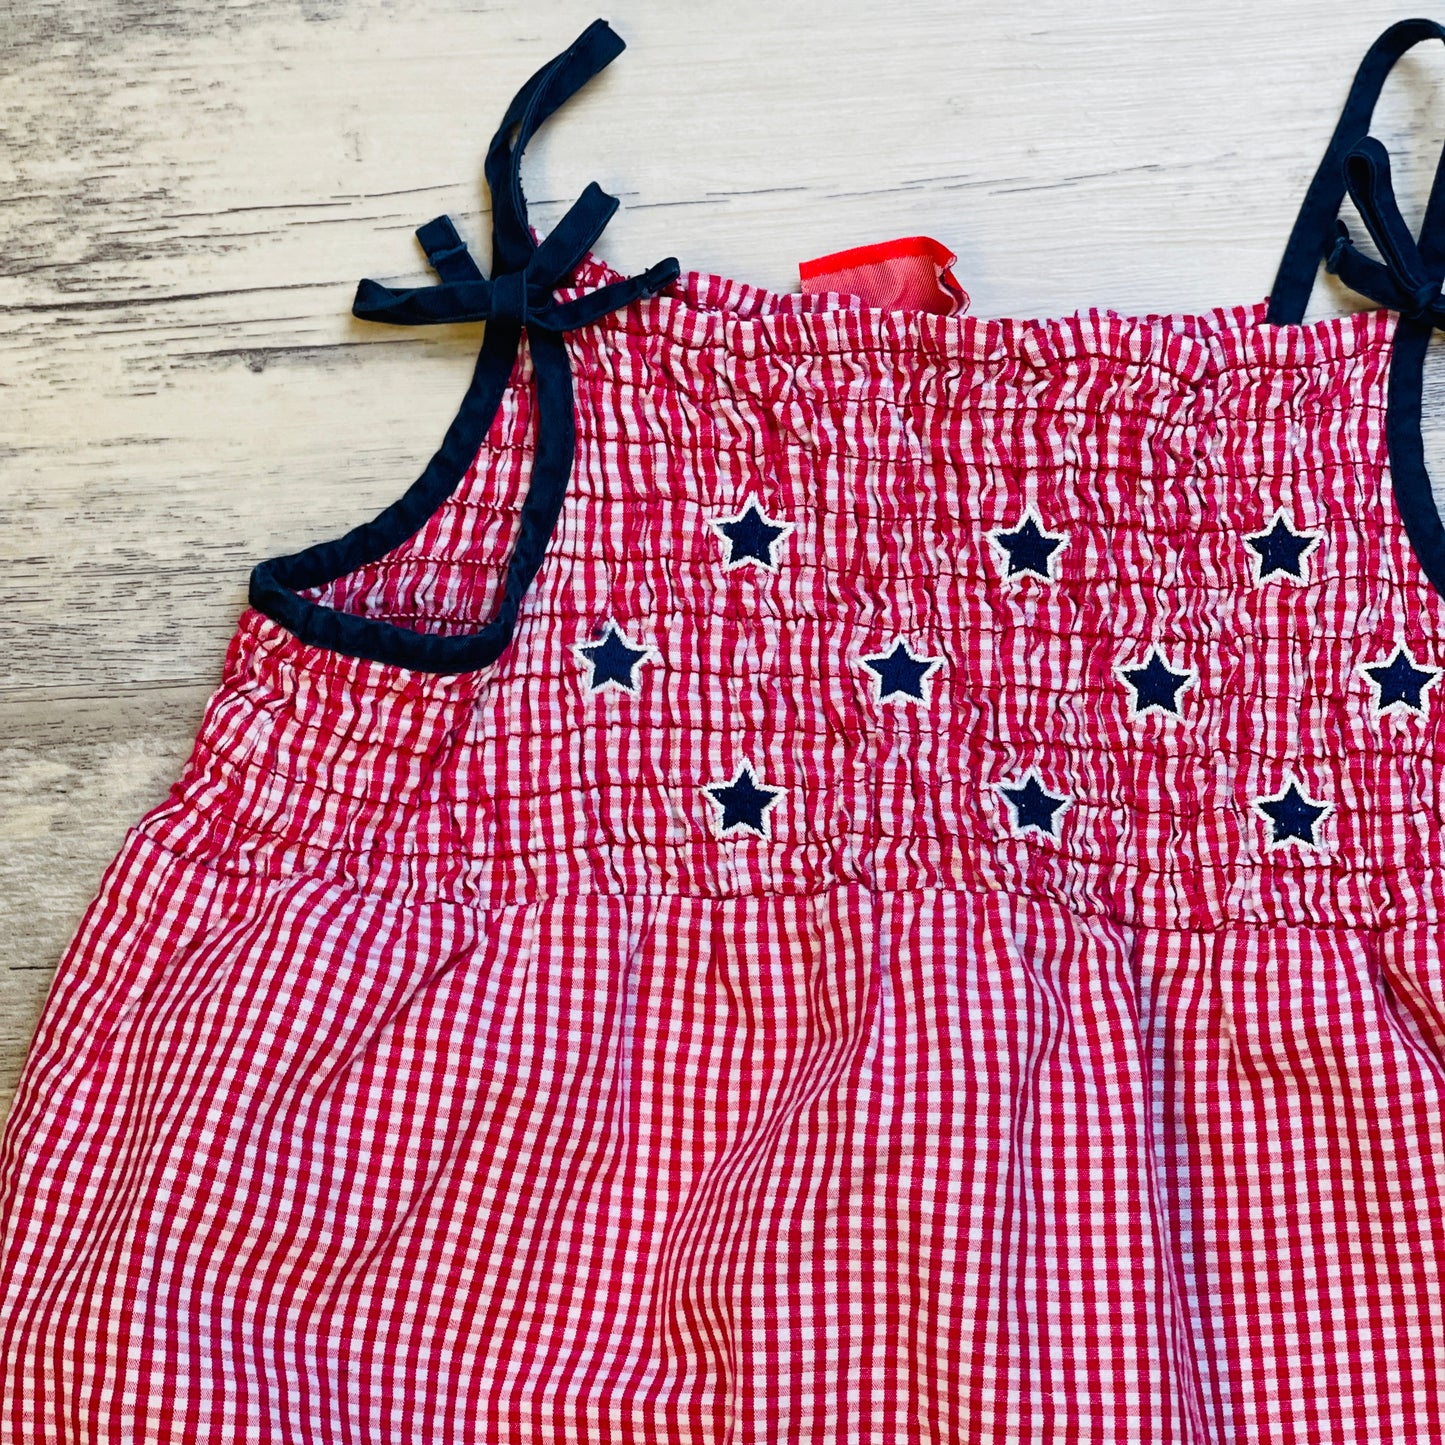 "All American Girl" Ruffle Tee & Ruched Patriotic Dress Bundle - 4T